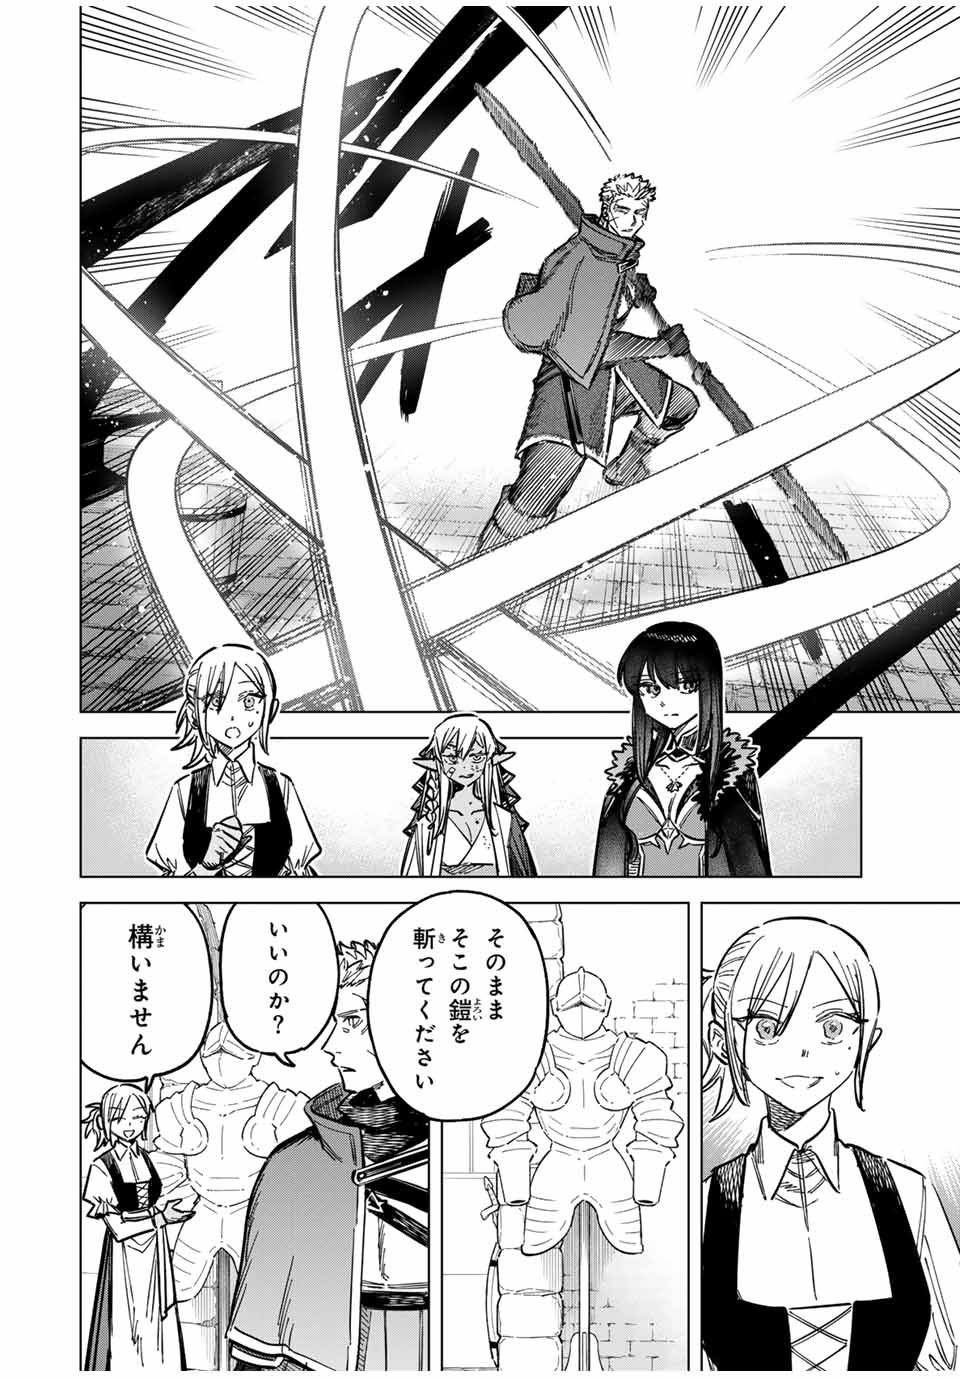 Witch and Mercenary 魔女と傭兵 第15話 - Page 8